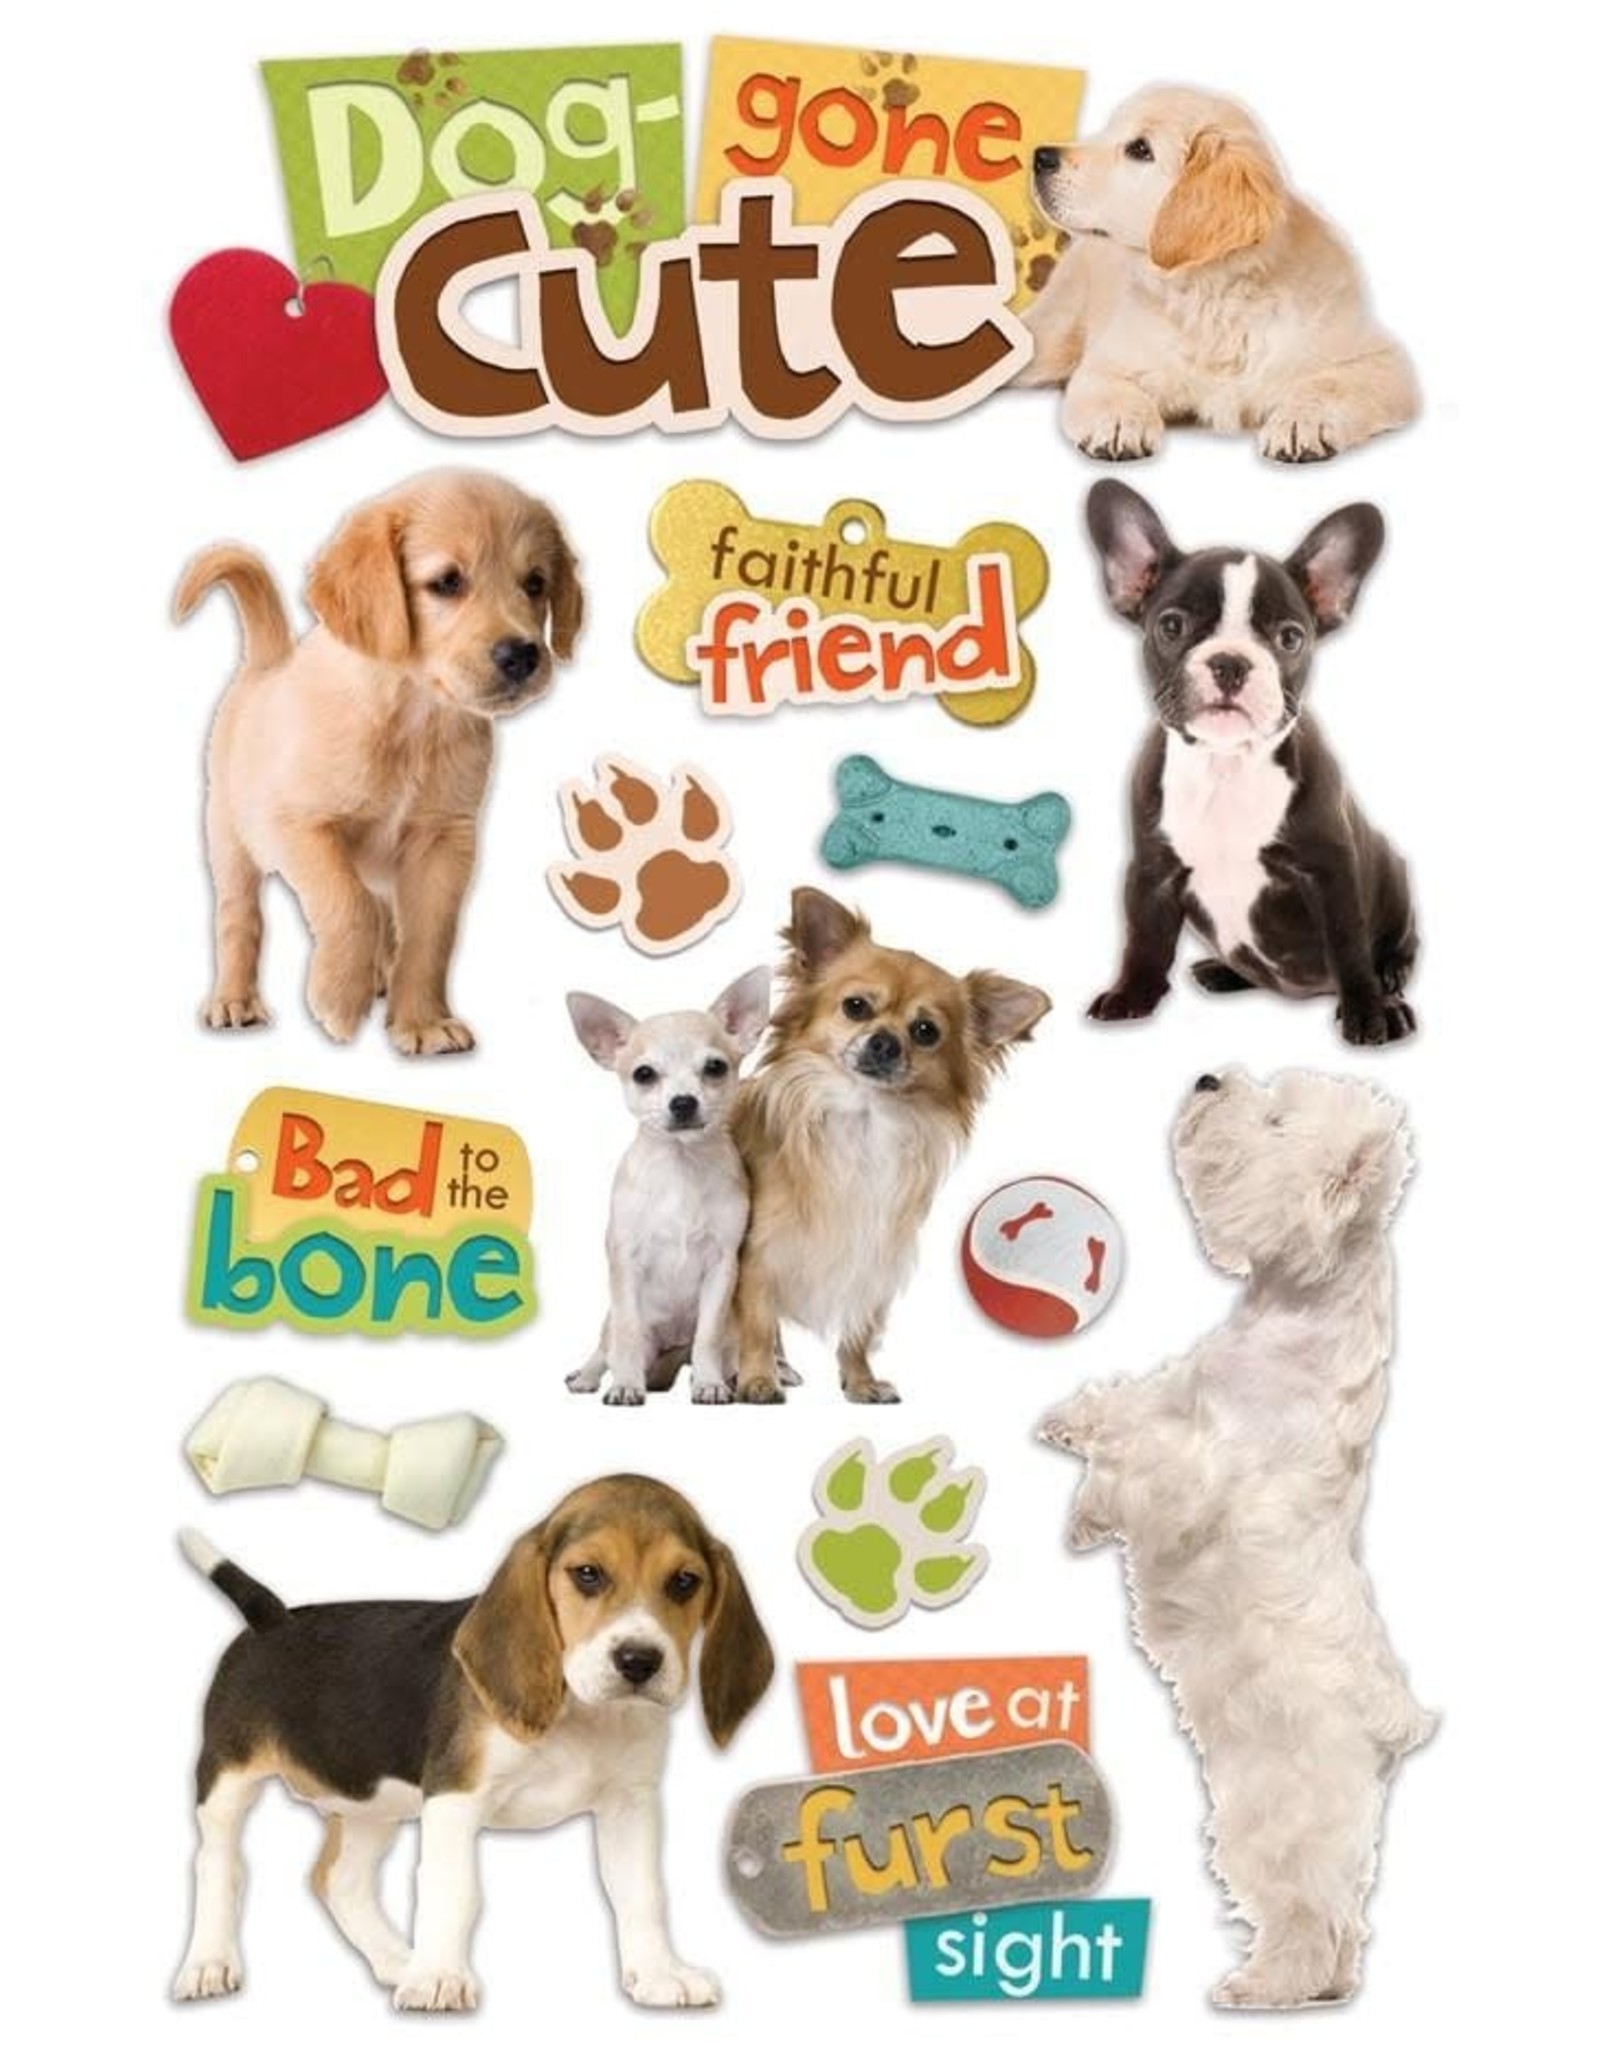 PAPER HOUSE PRODUCTIONS PAPER HOUSE DOG-GONE CUTE 3D STICKERS